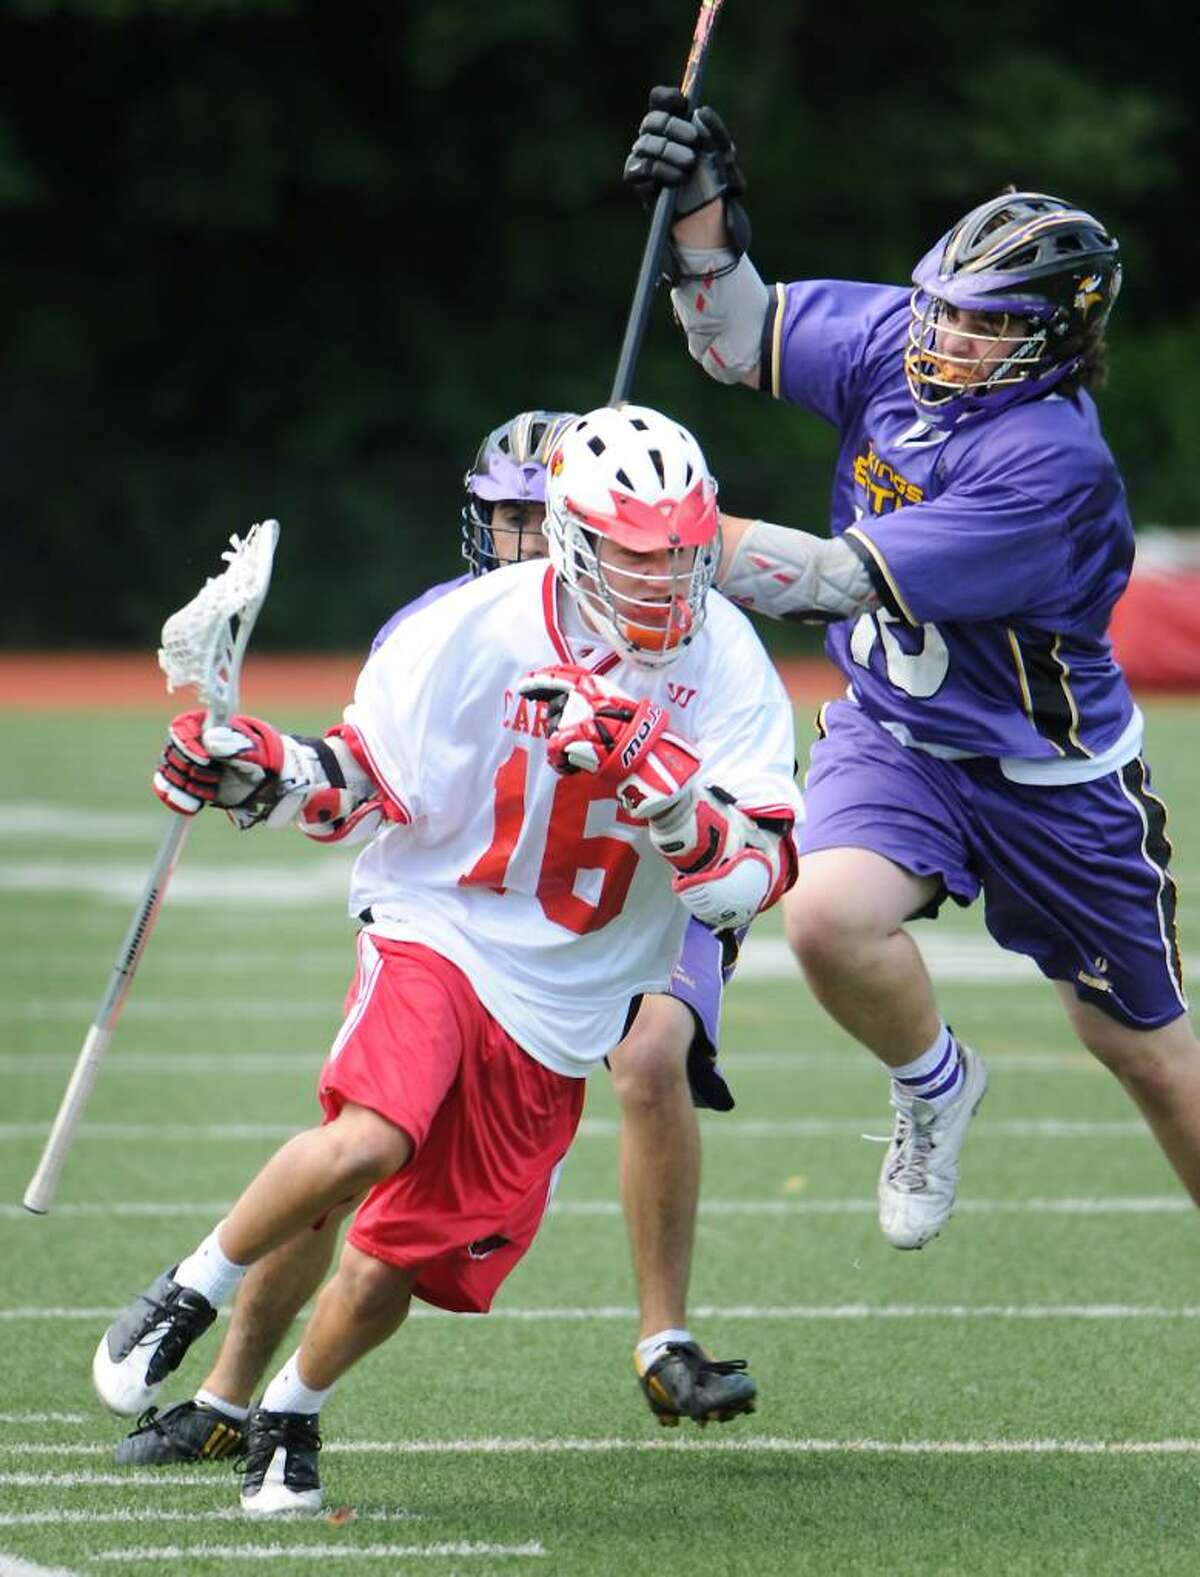 Greenwich High School's Jake Stein controls the ball with pressure from Westhill High School's Tom McCartney and Mike Suchochi in boys lacrosse in Greenwich, Conn. on Saturday May 15, 2010.